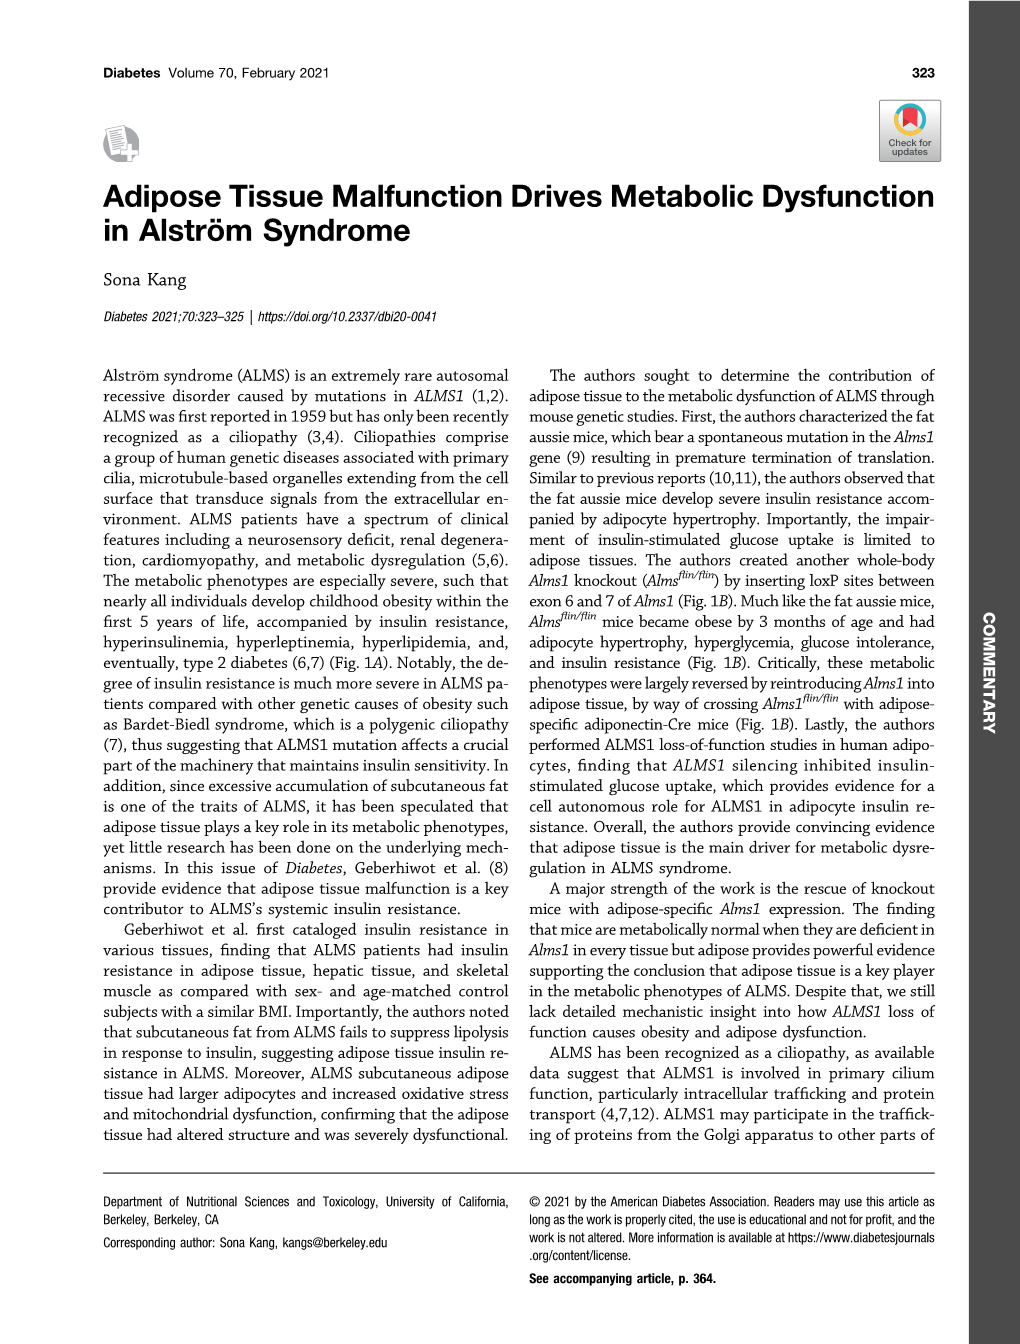 Adipose Tissue Malfunction Drives Metabolic Dysfunction in Alström Syndrome